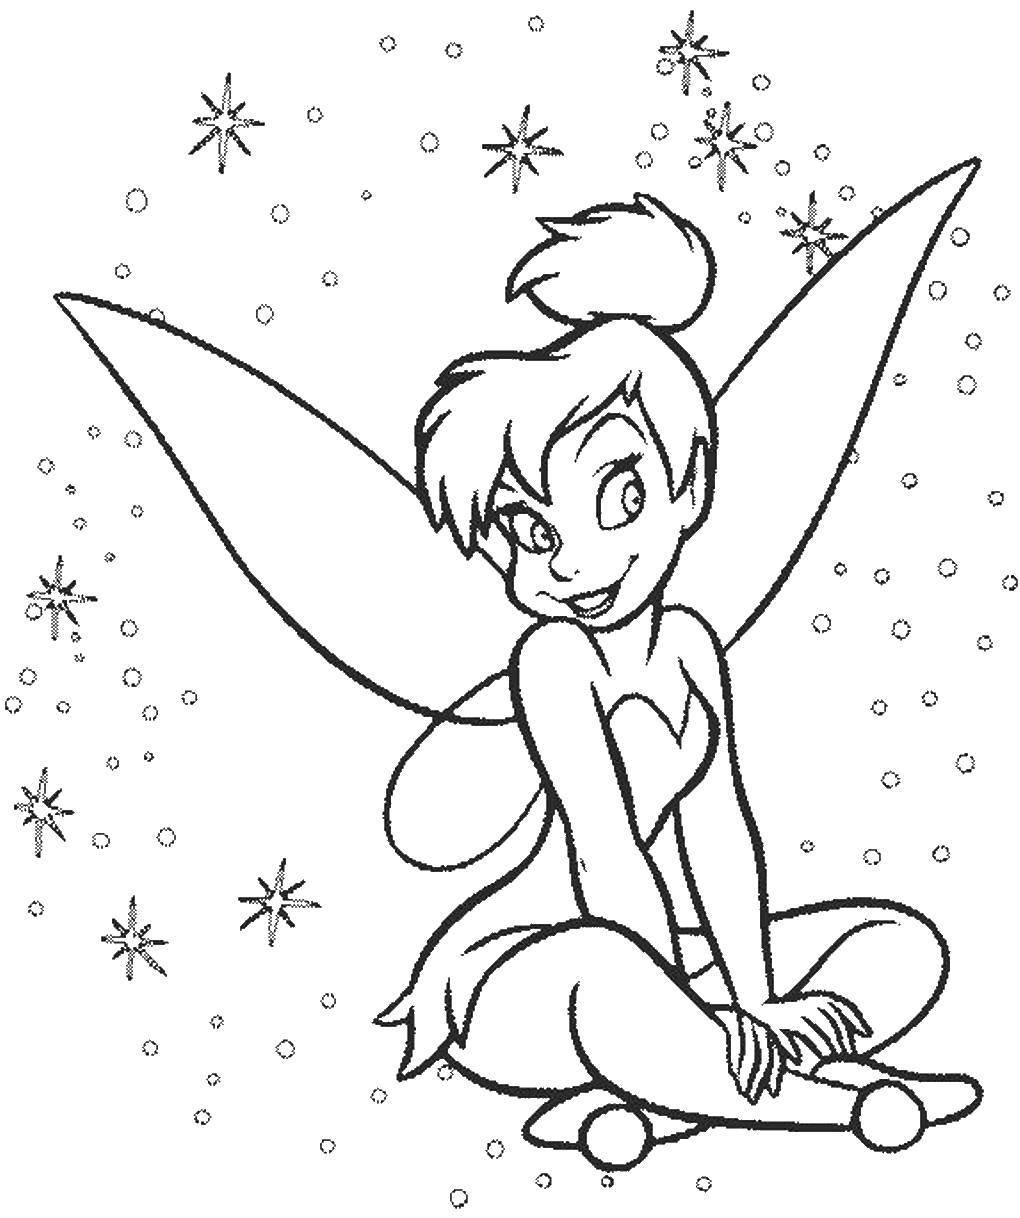 Coloring Tinker bell from disney fairies . Category fairy. Tags:  Fairy, forest, fairy tale.